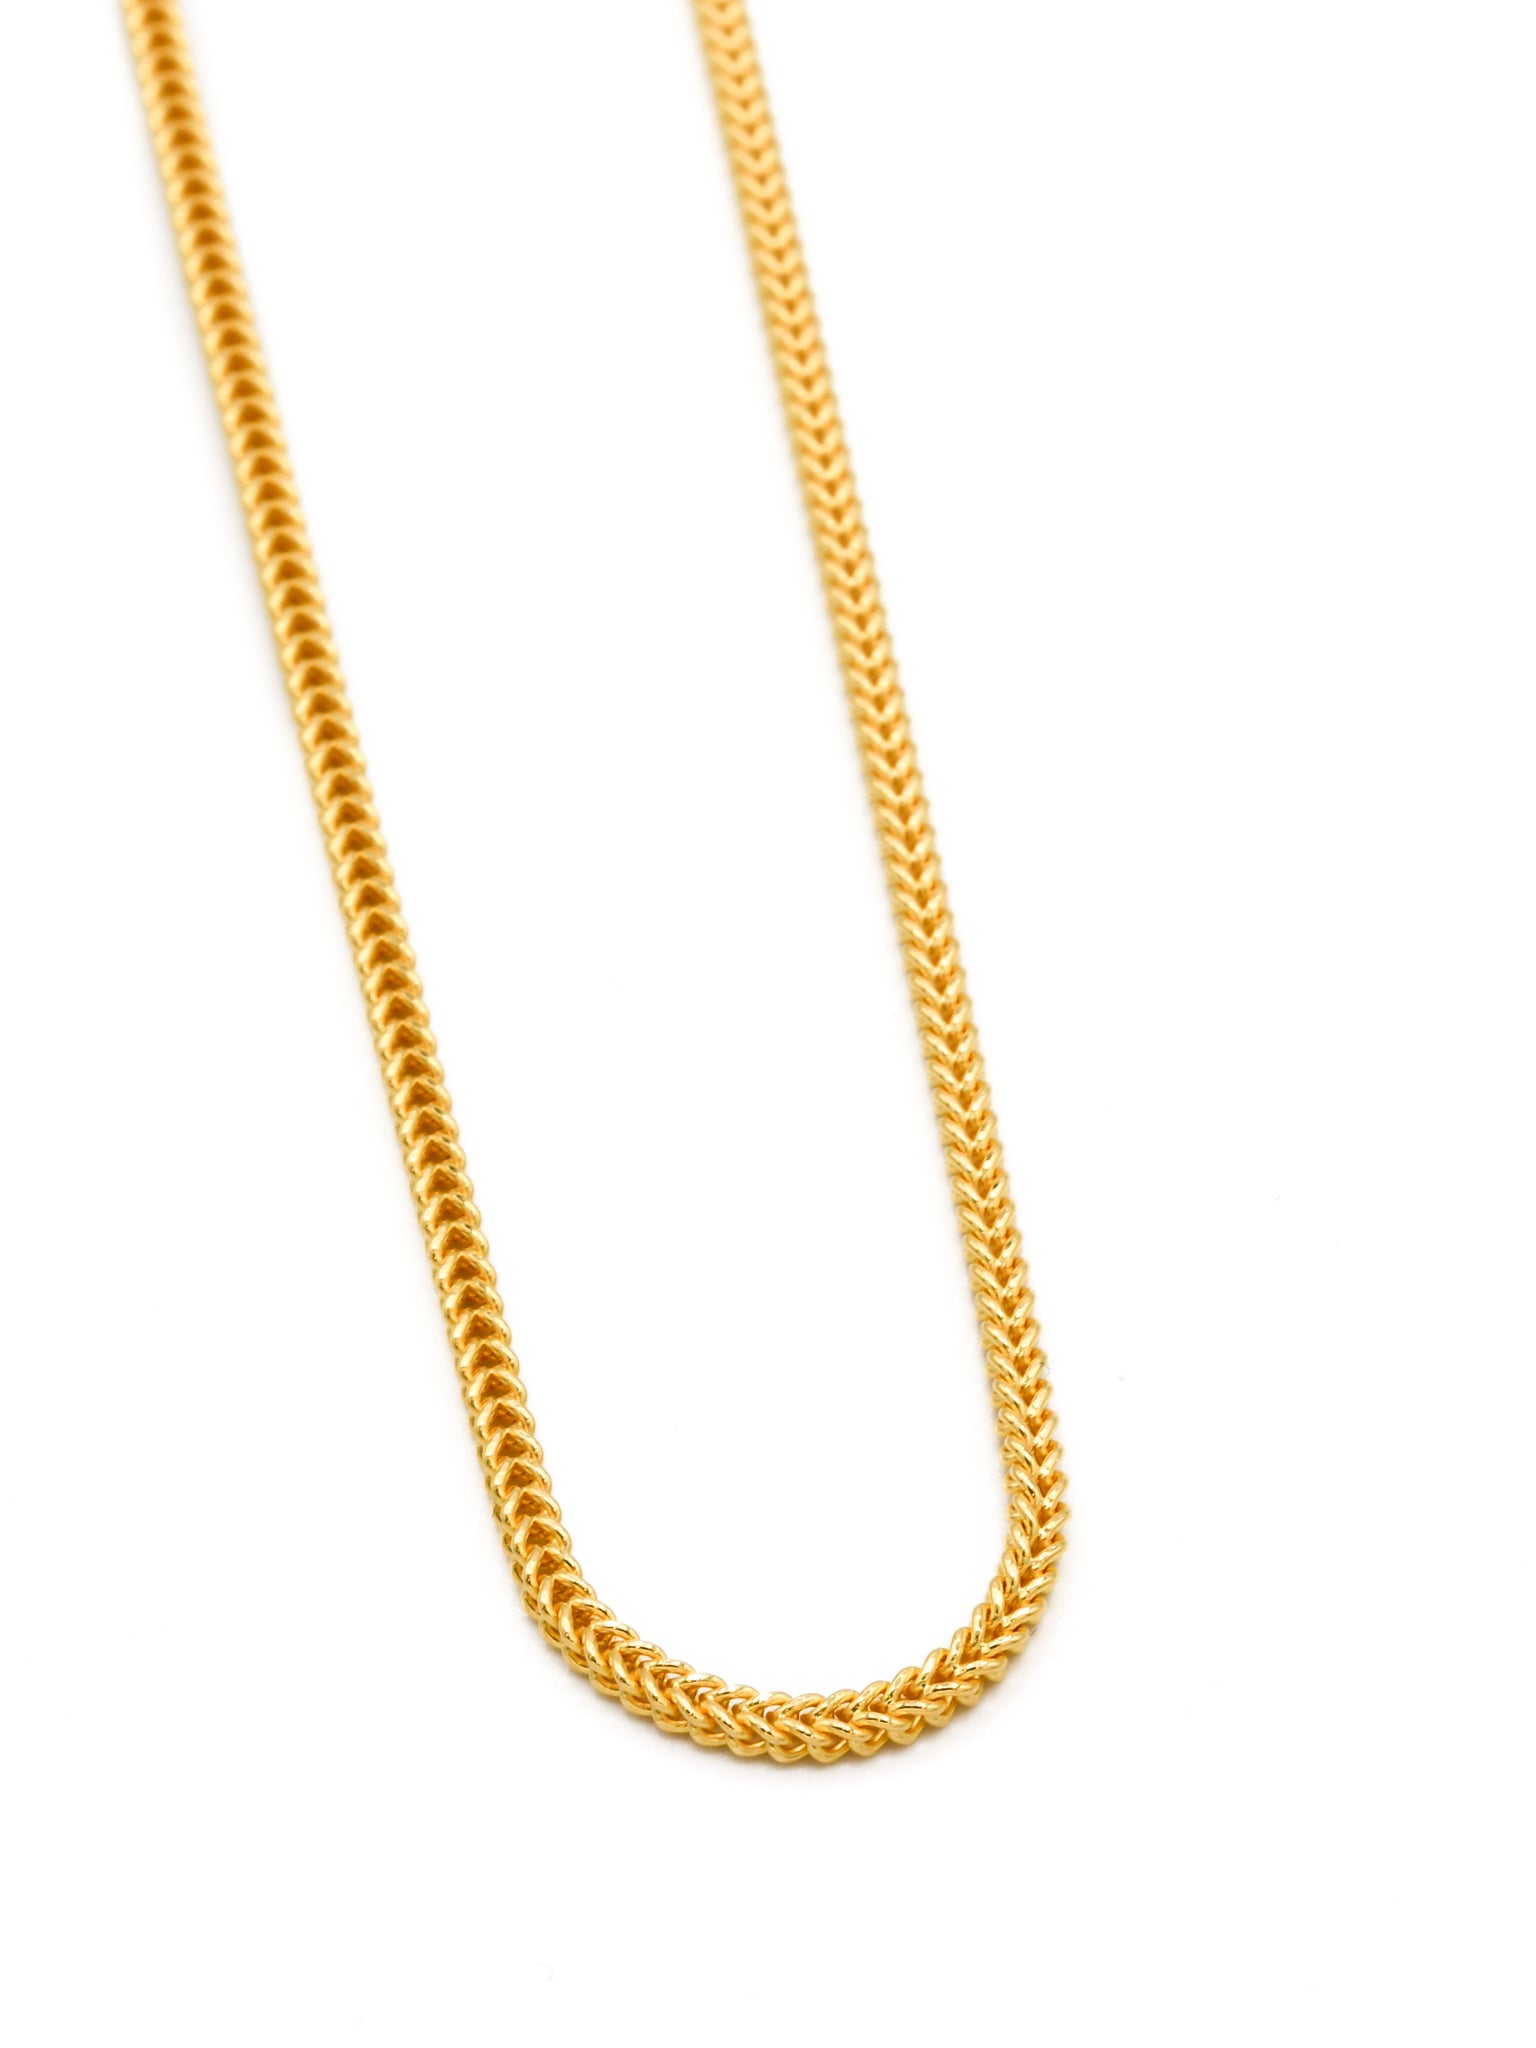 22ct Gold Hollow Fox Tail Chain - 50 CM - Roop Darshan